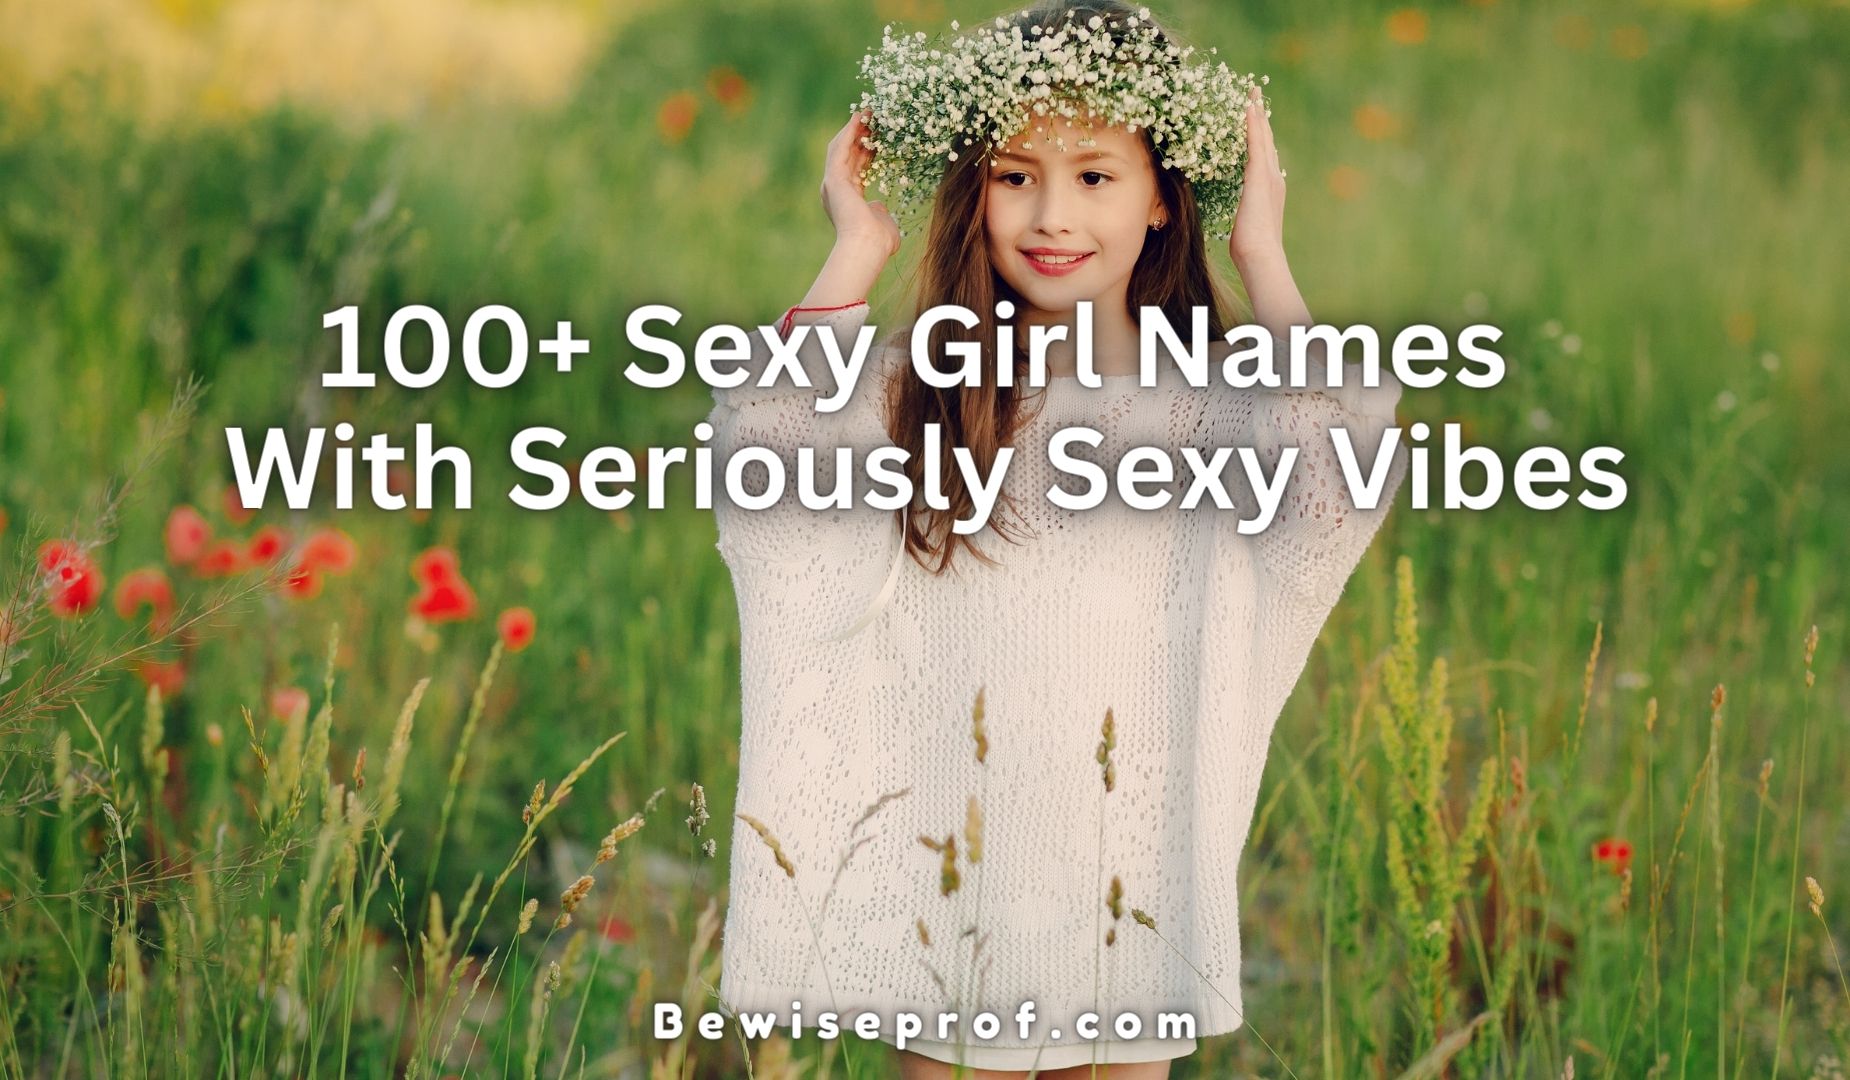 100+ Sexy Girl Names With Seriously Sexy Vibes